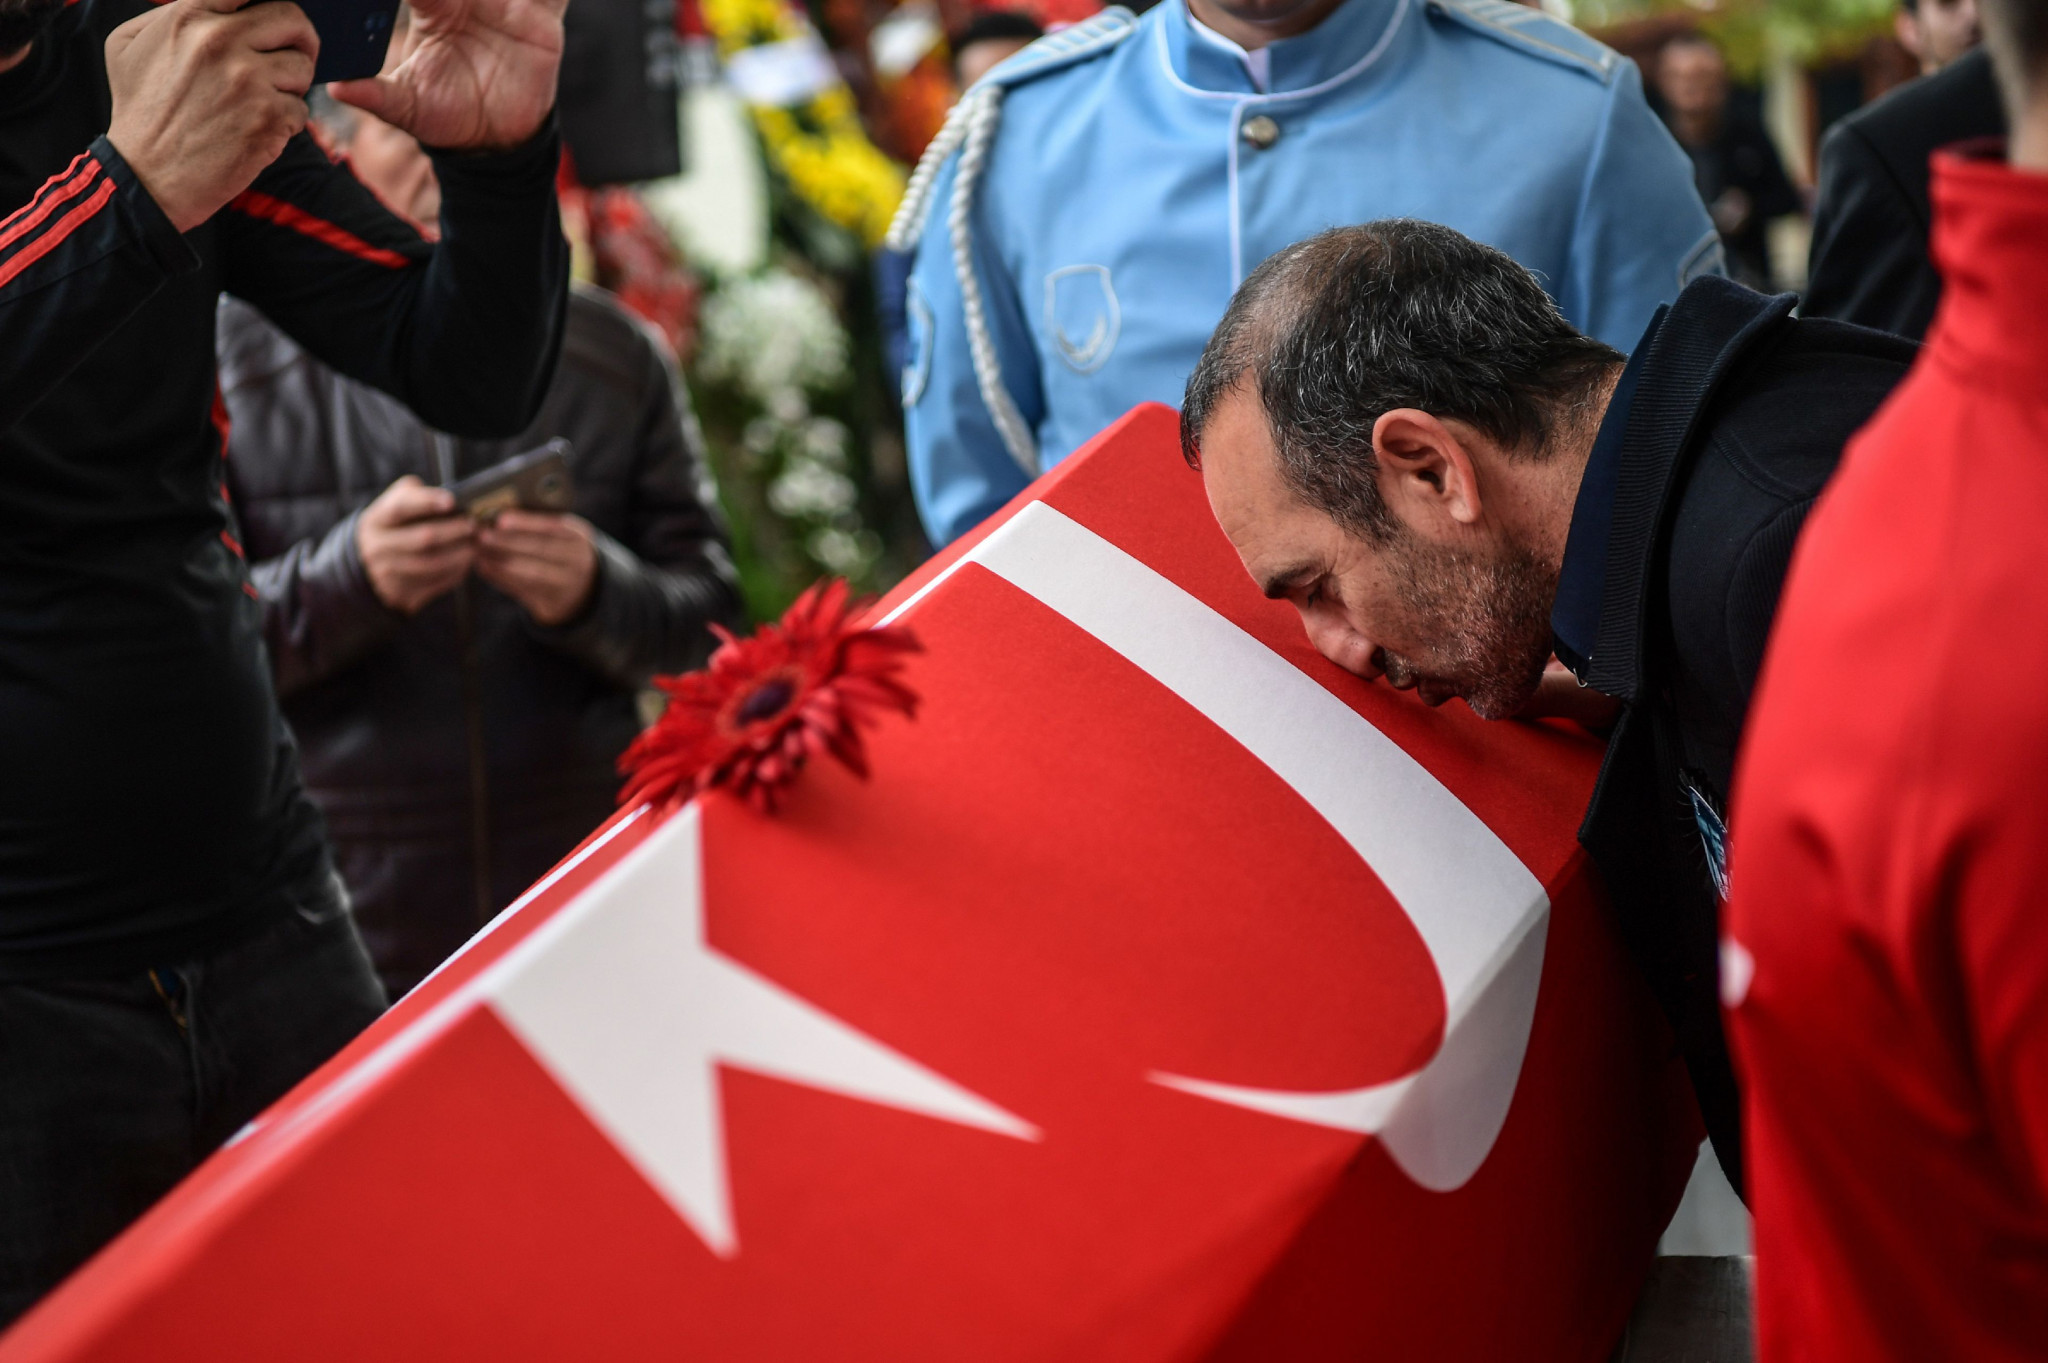 Valerios Leonidis won in the behaviour category for attending the funeral of Turkish rival Naim Süleymanoğlu and kissing his coffin ©Getty Images